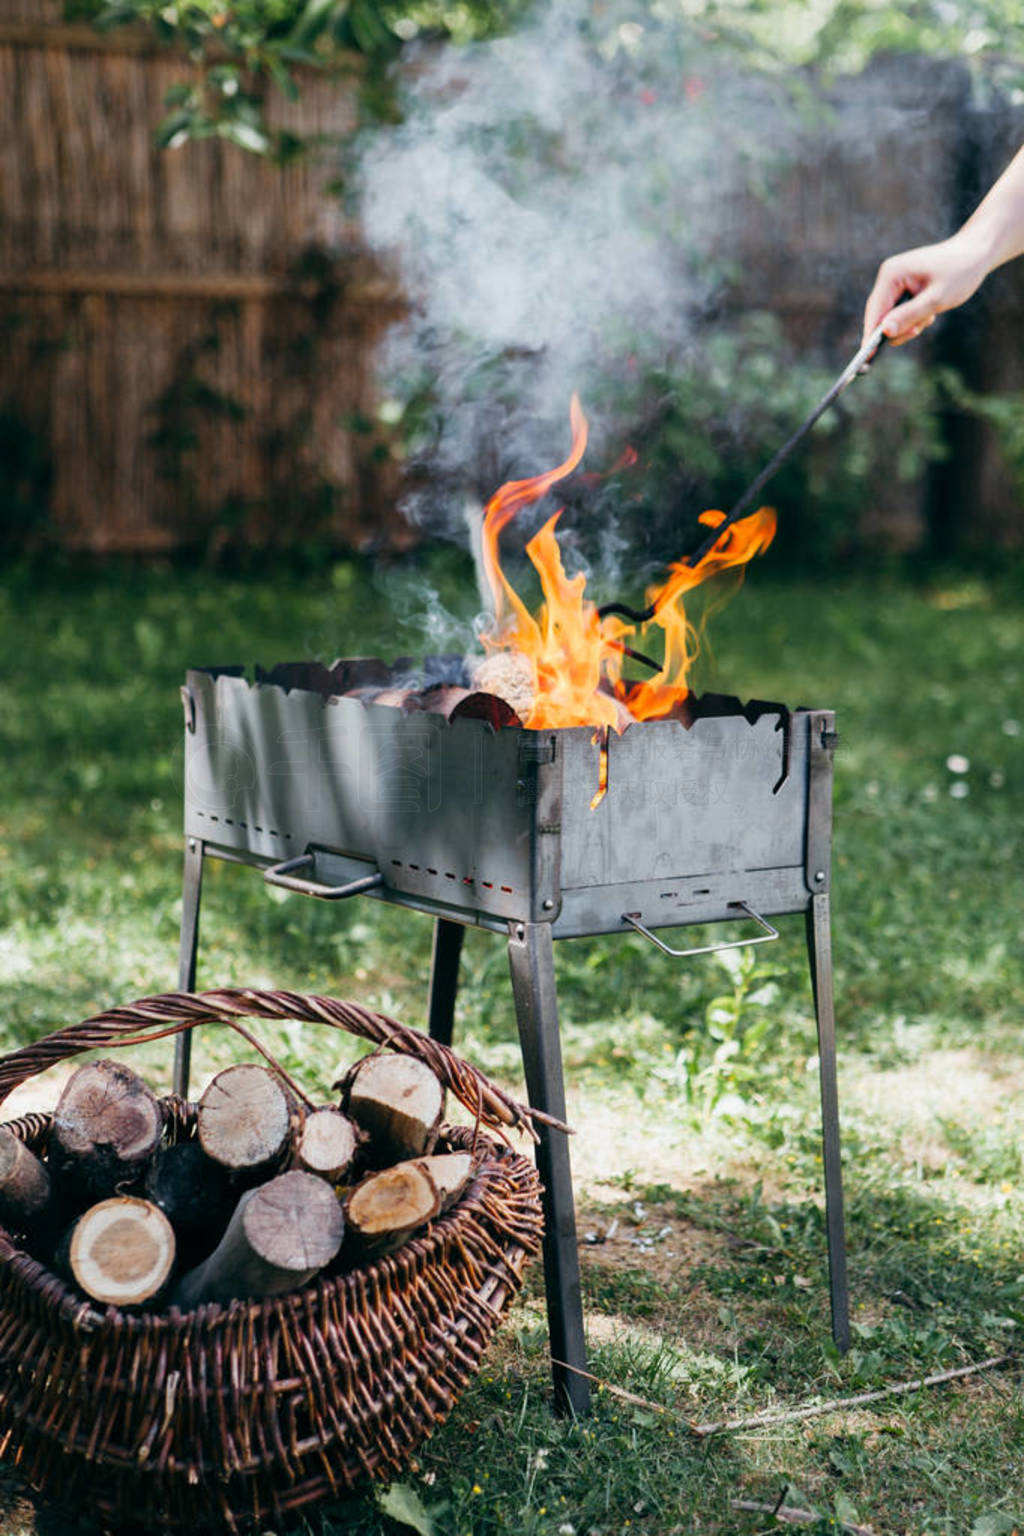 Flaming barbecue grill in the yard in summertime